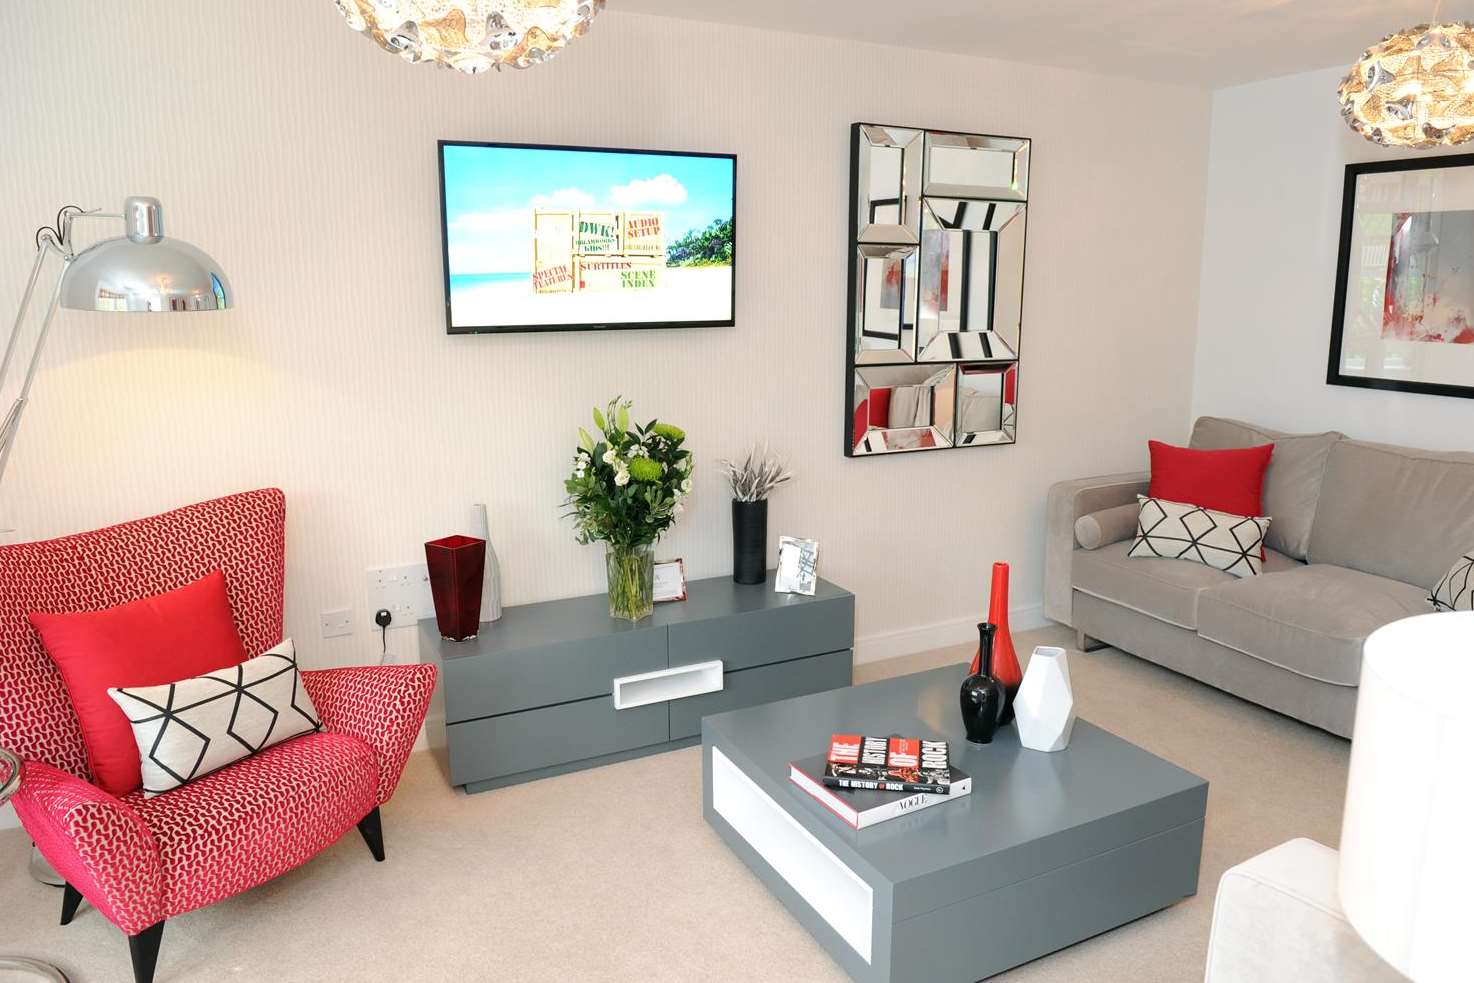 The first show home at Castle Hill, Ebbsfleet